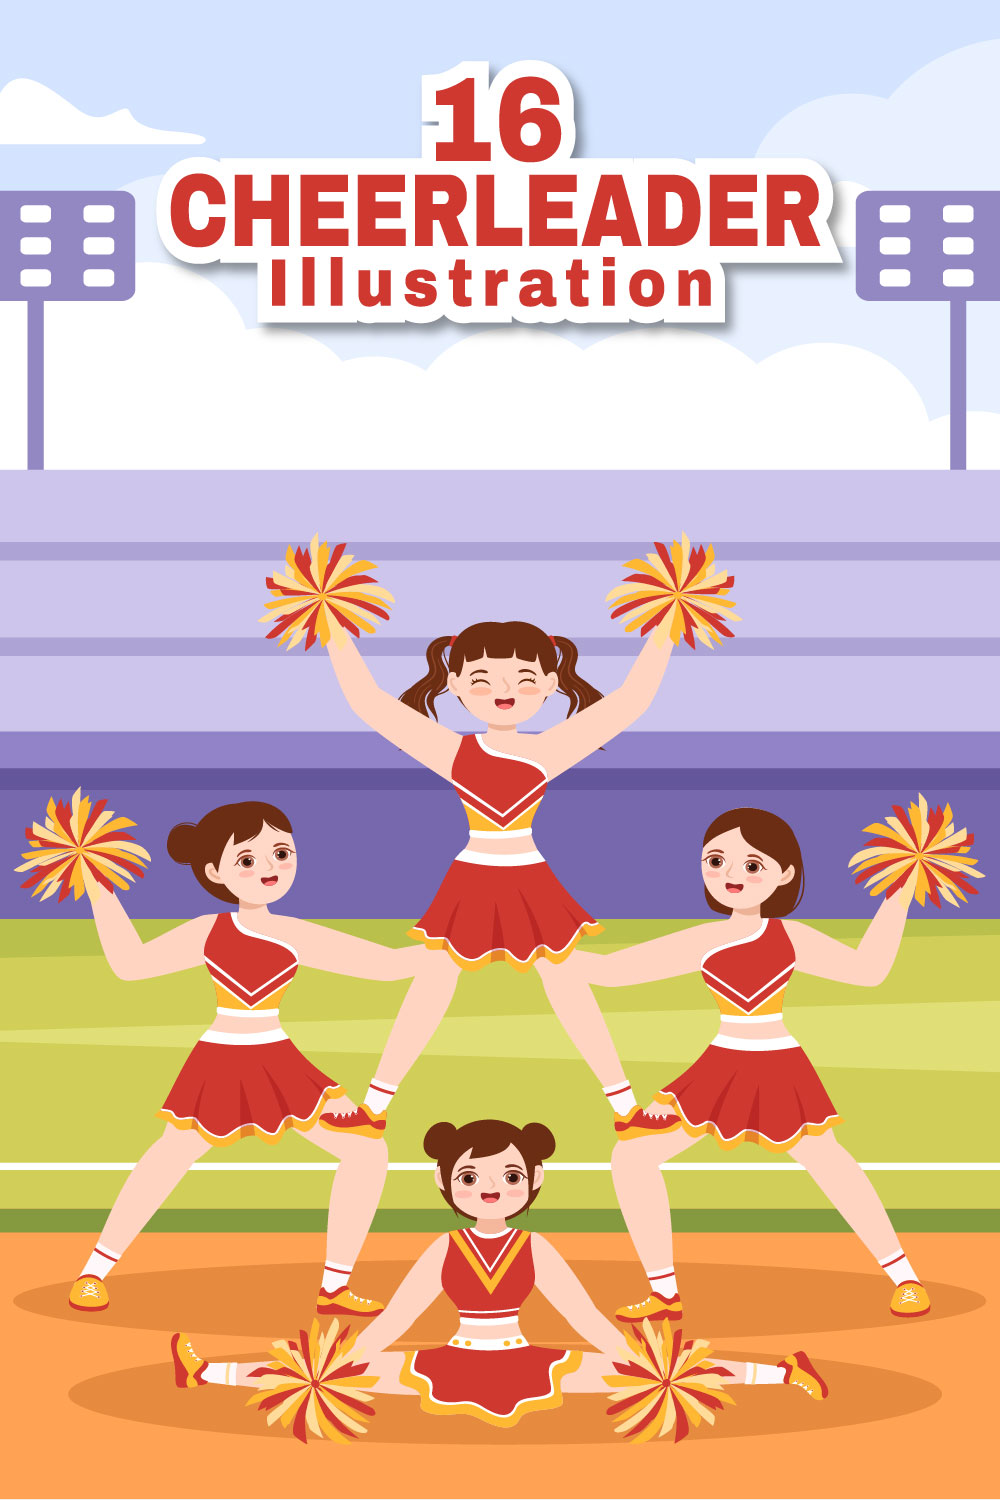 Colorful image with dancing girls cheerleaders in red outfits.